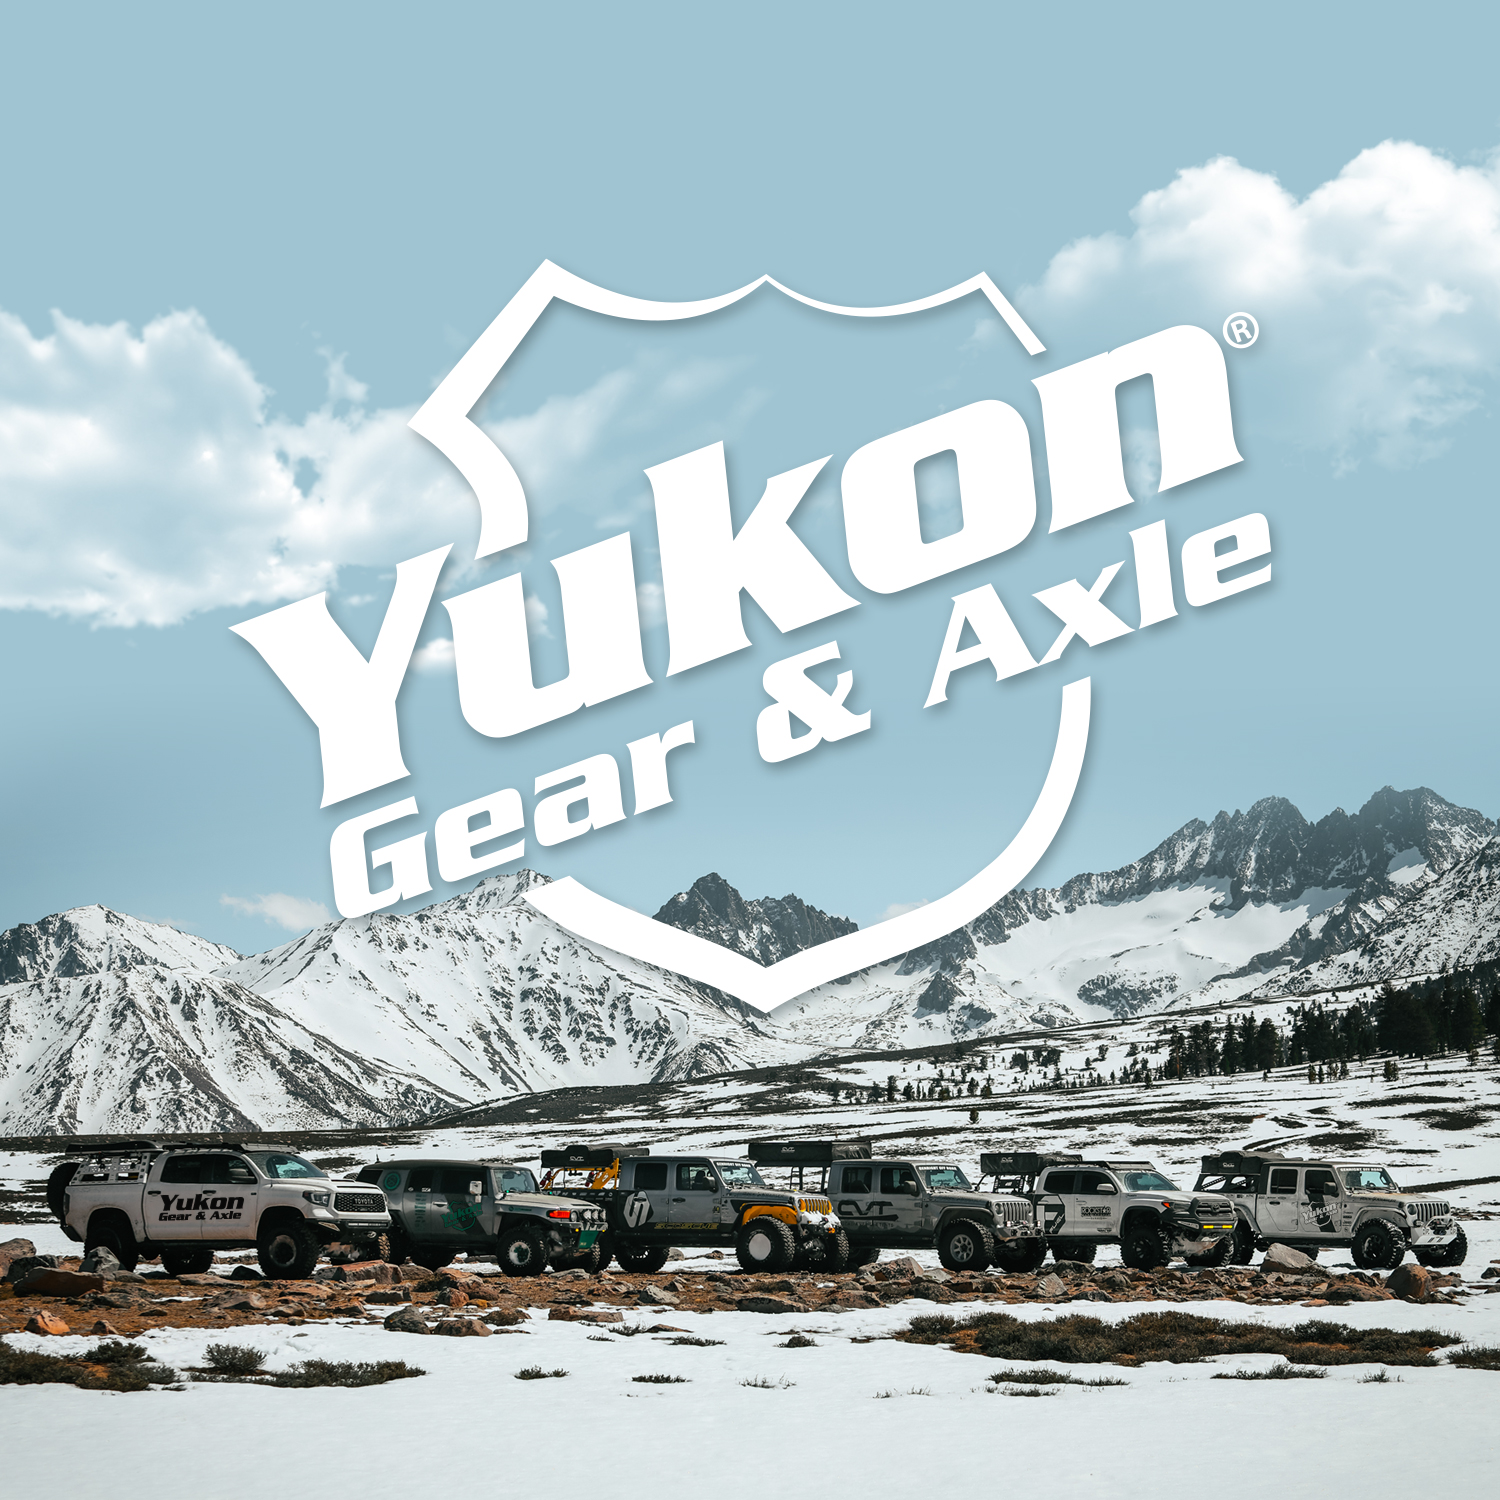 High performance Yukon Ring & Pinion gear set for Model 20 in a 4.88 ratio 